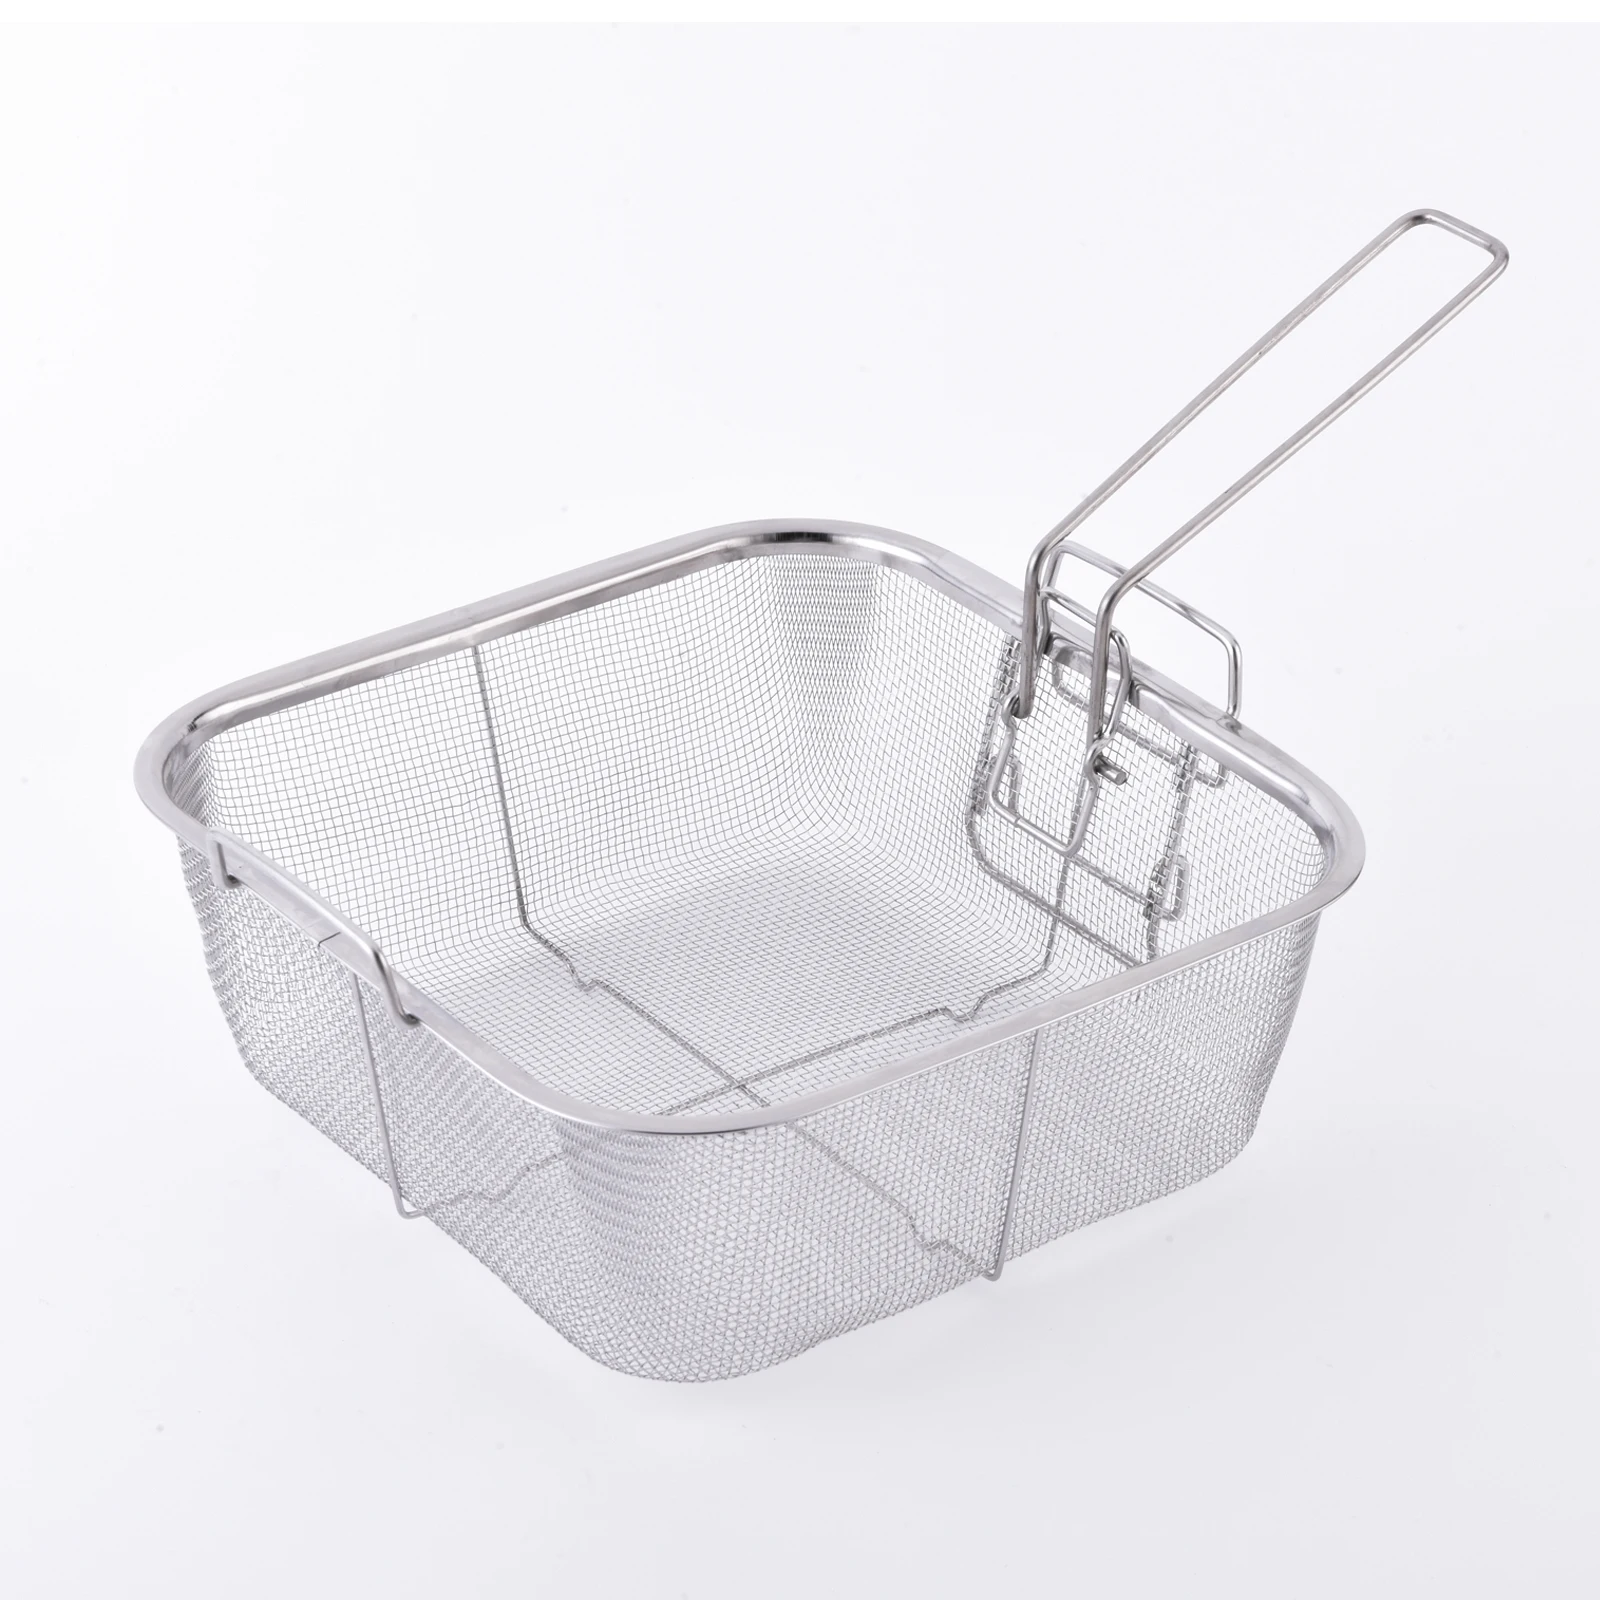 ouying1418 Stainless Steel Oil Fry Basket Foldable Expandable Mesh Basket Strainer Net 